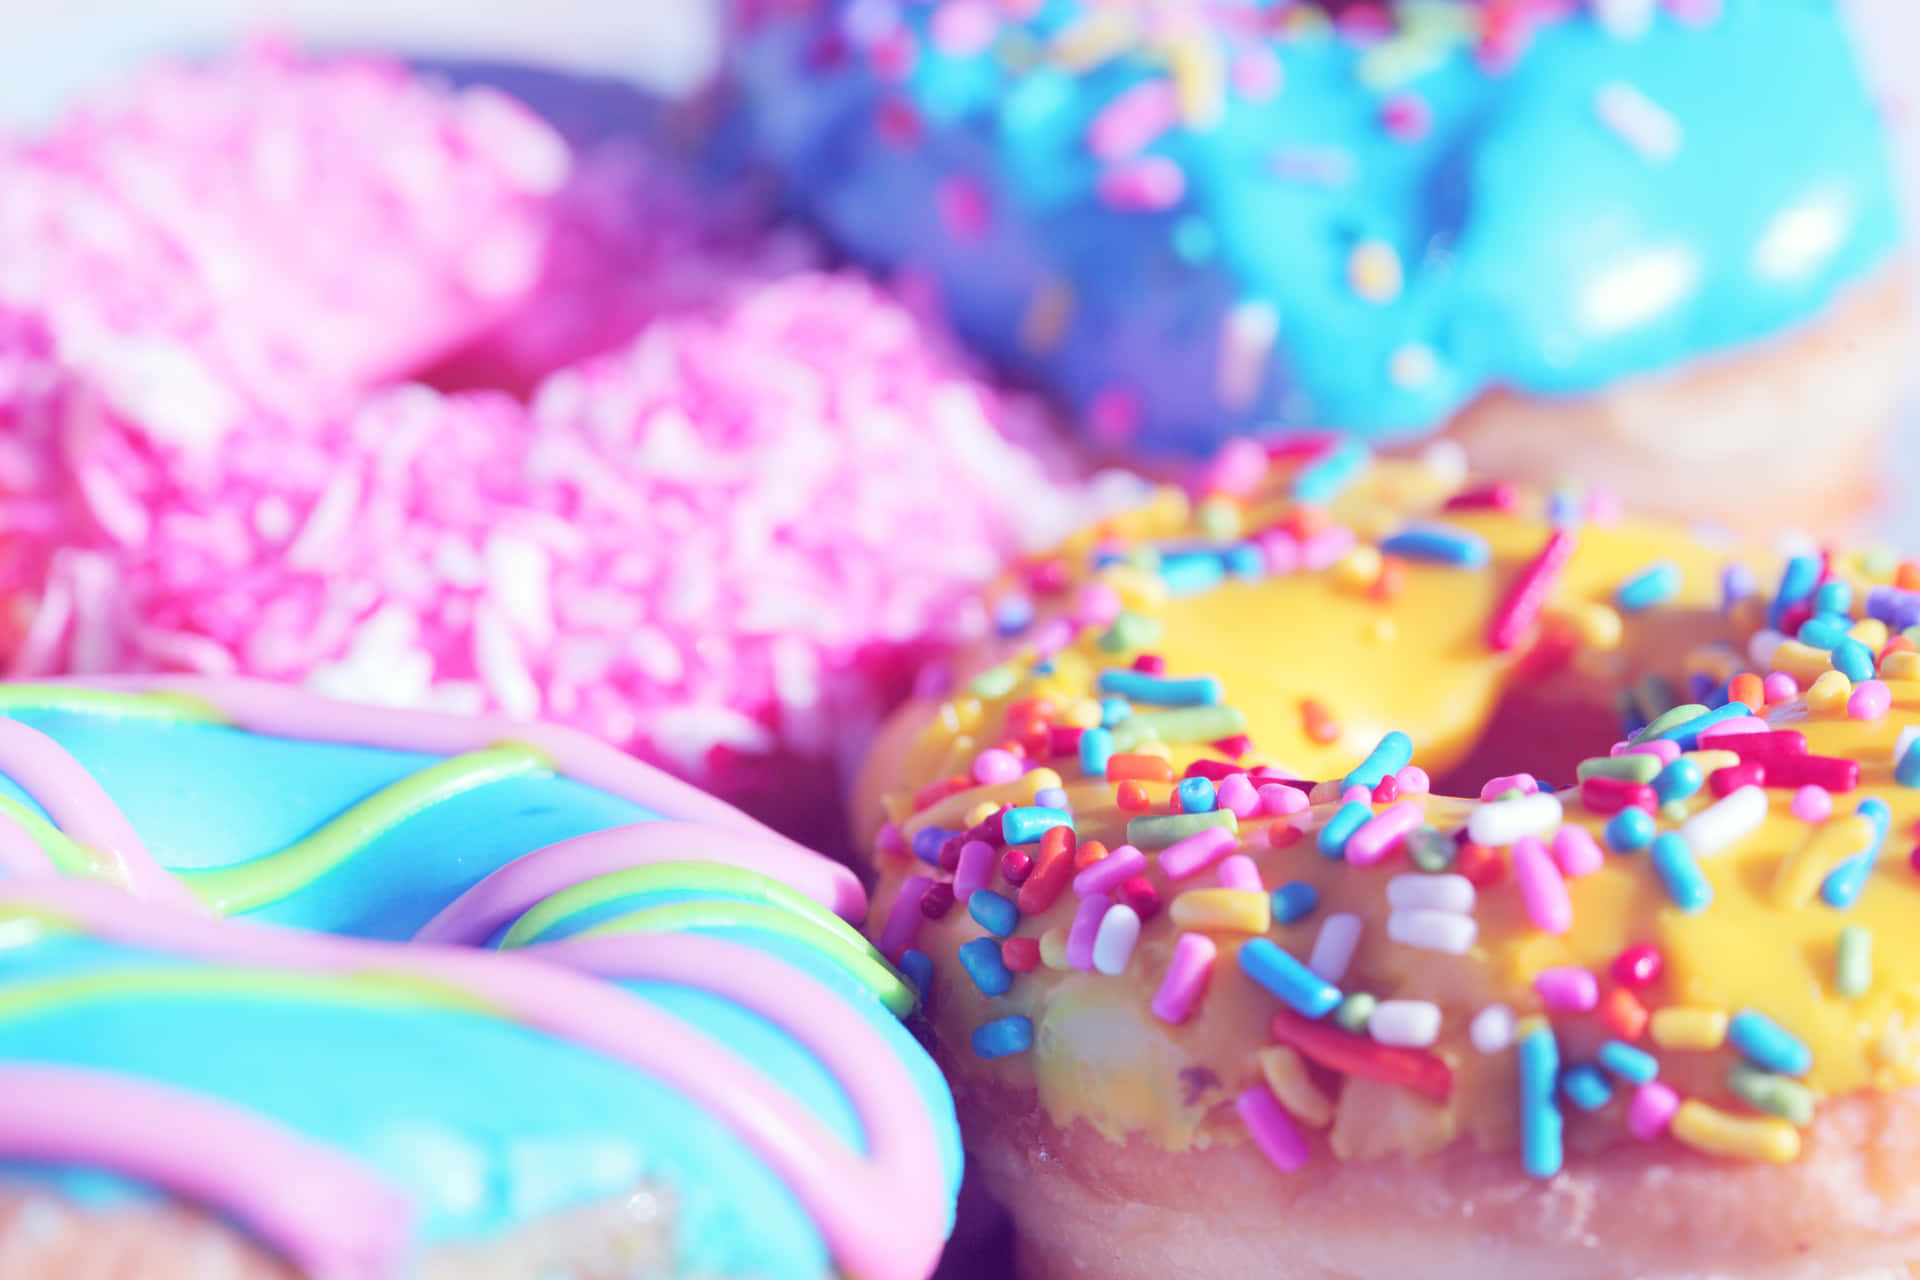 Adorable Pink Glazed Donut with Sprinkles on a Marble Surface Wallpaper